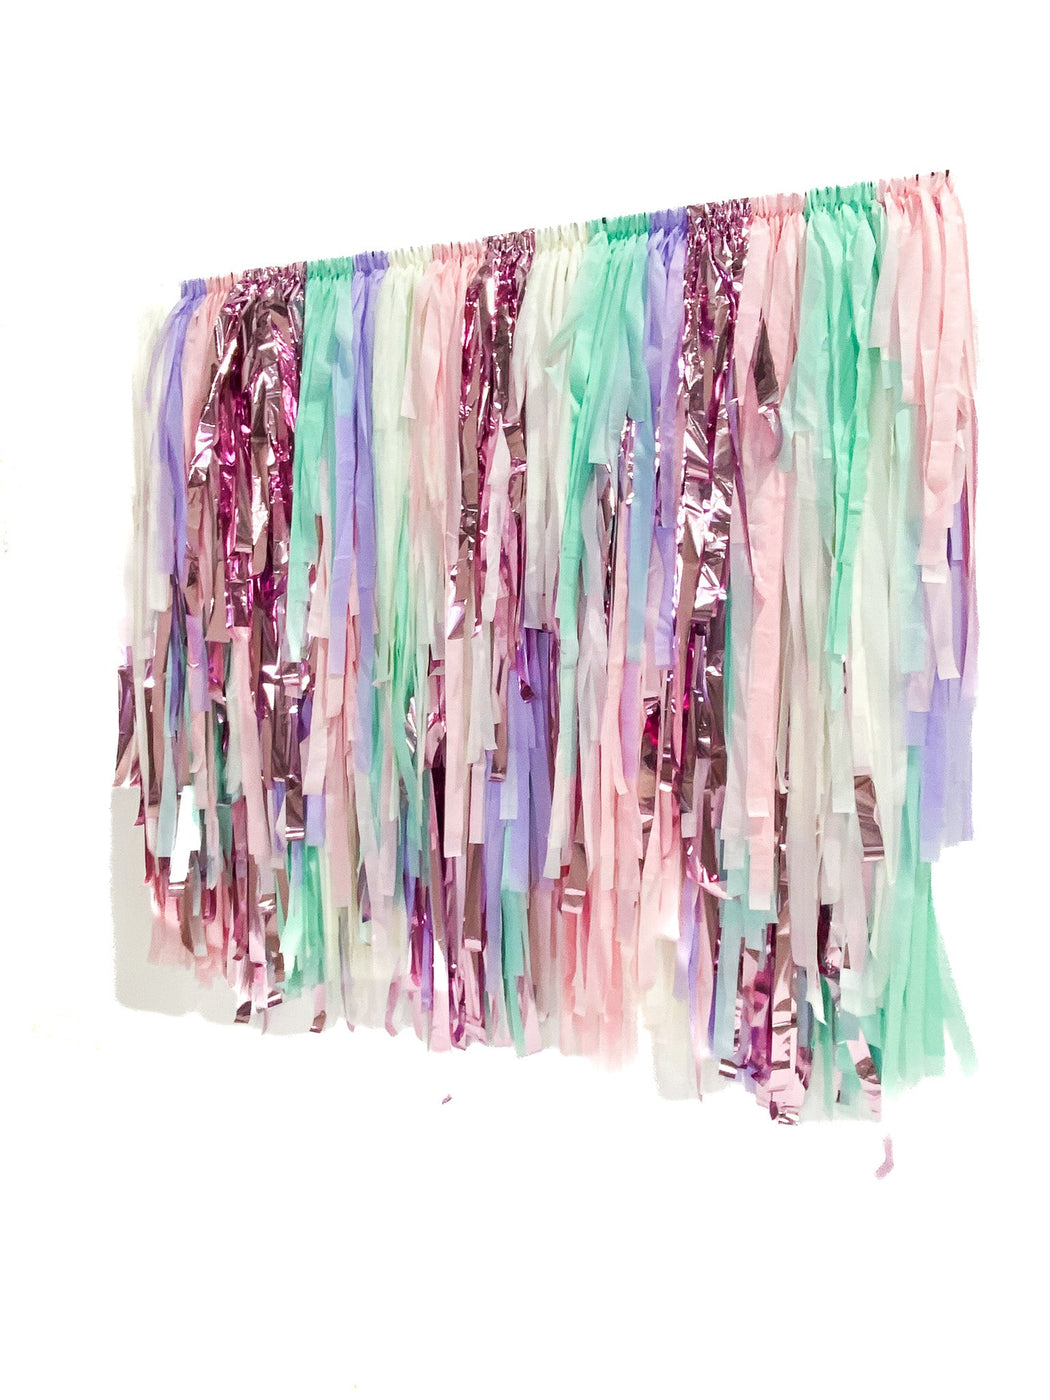 It Was All A Dream Fringe Backdrop - Oh My Darling Party Co-baby showerbirthday decorationsbridal #Fringe_Backdrop#